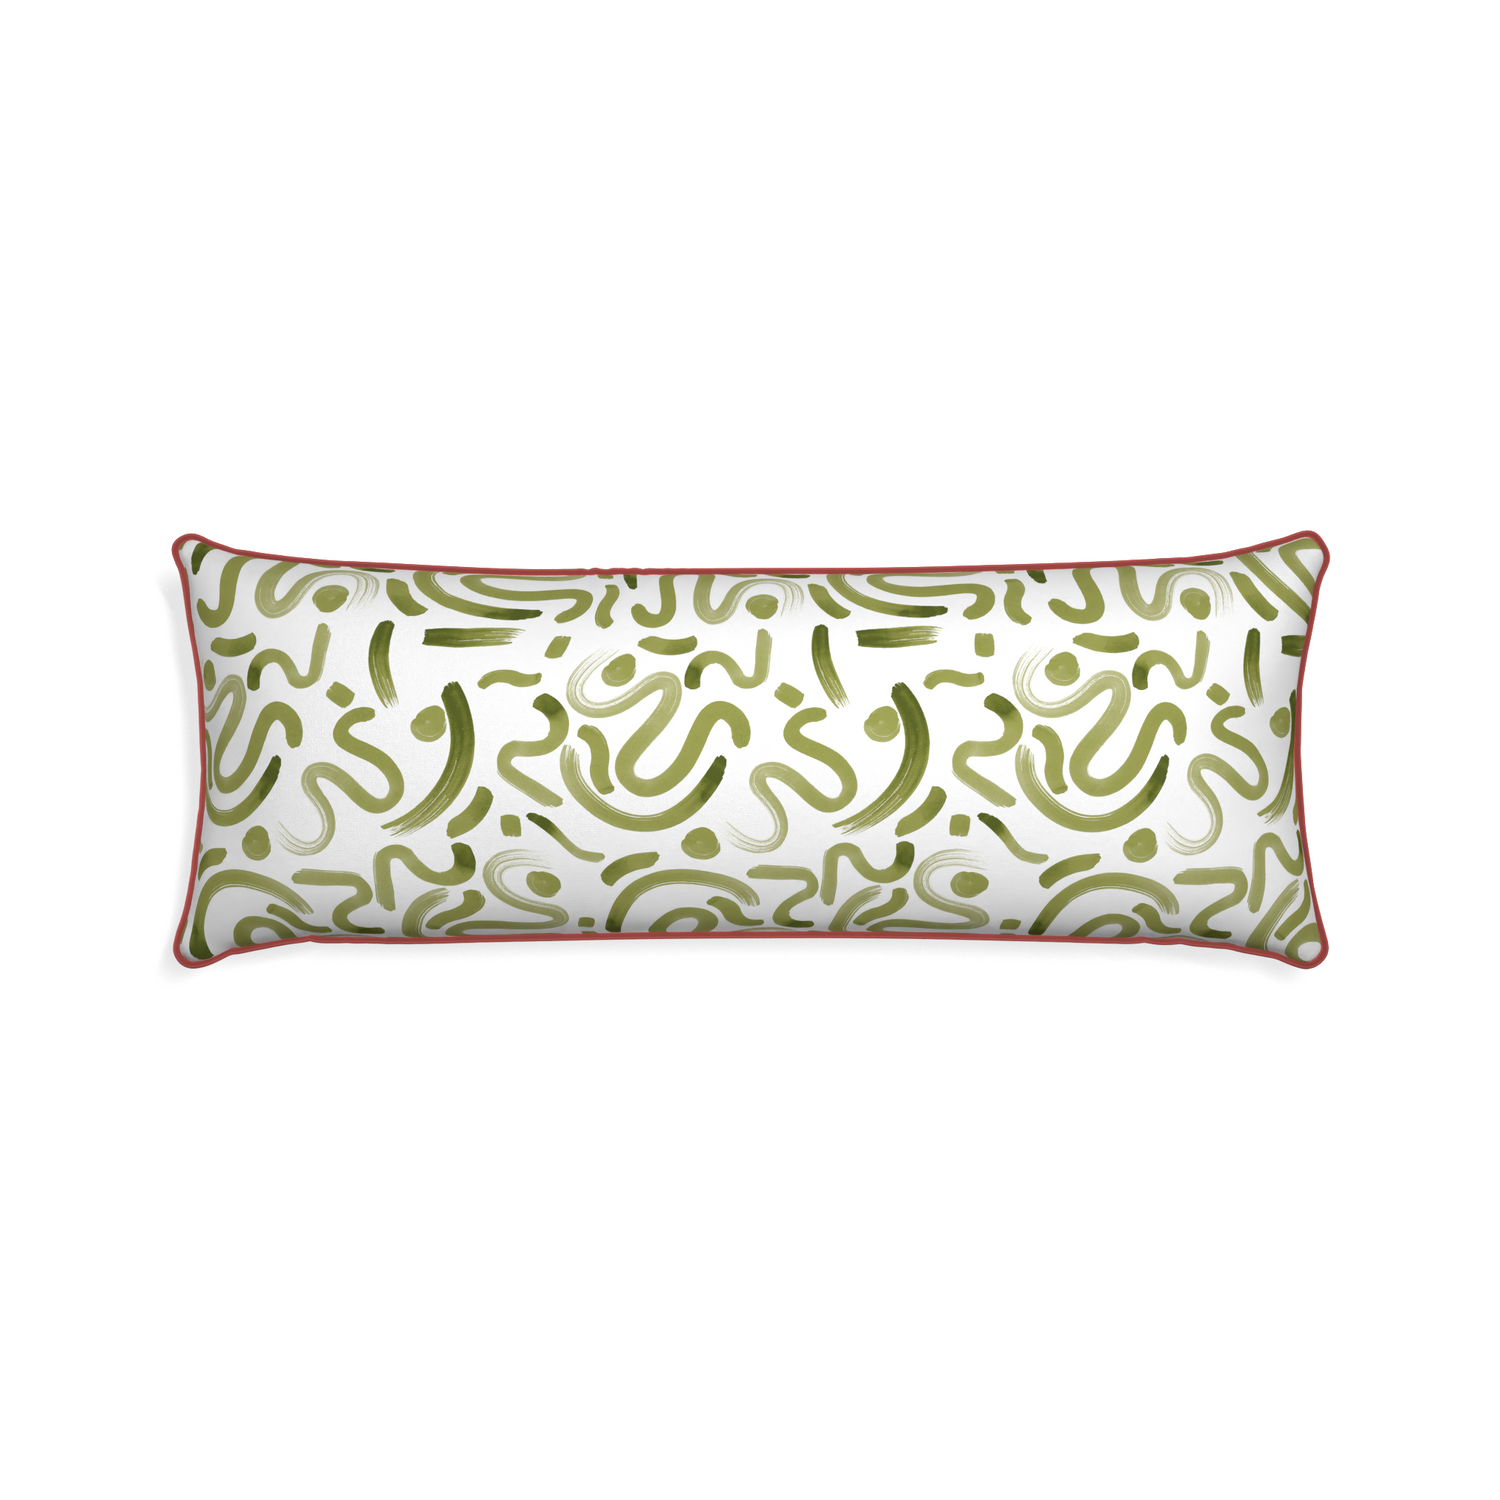 Xl-lumbar hockney moss custom pillow with c piping on white background